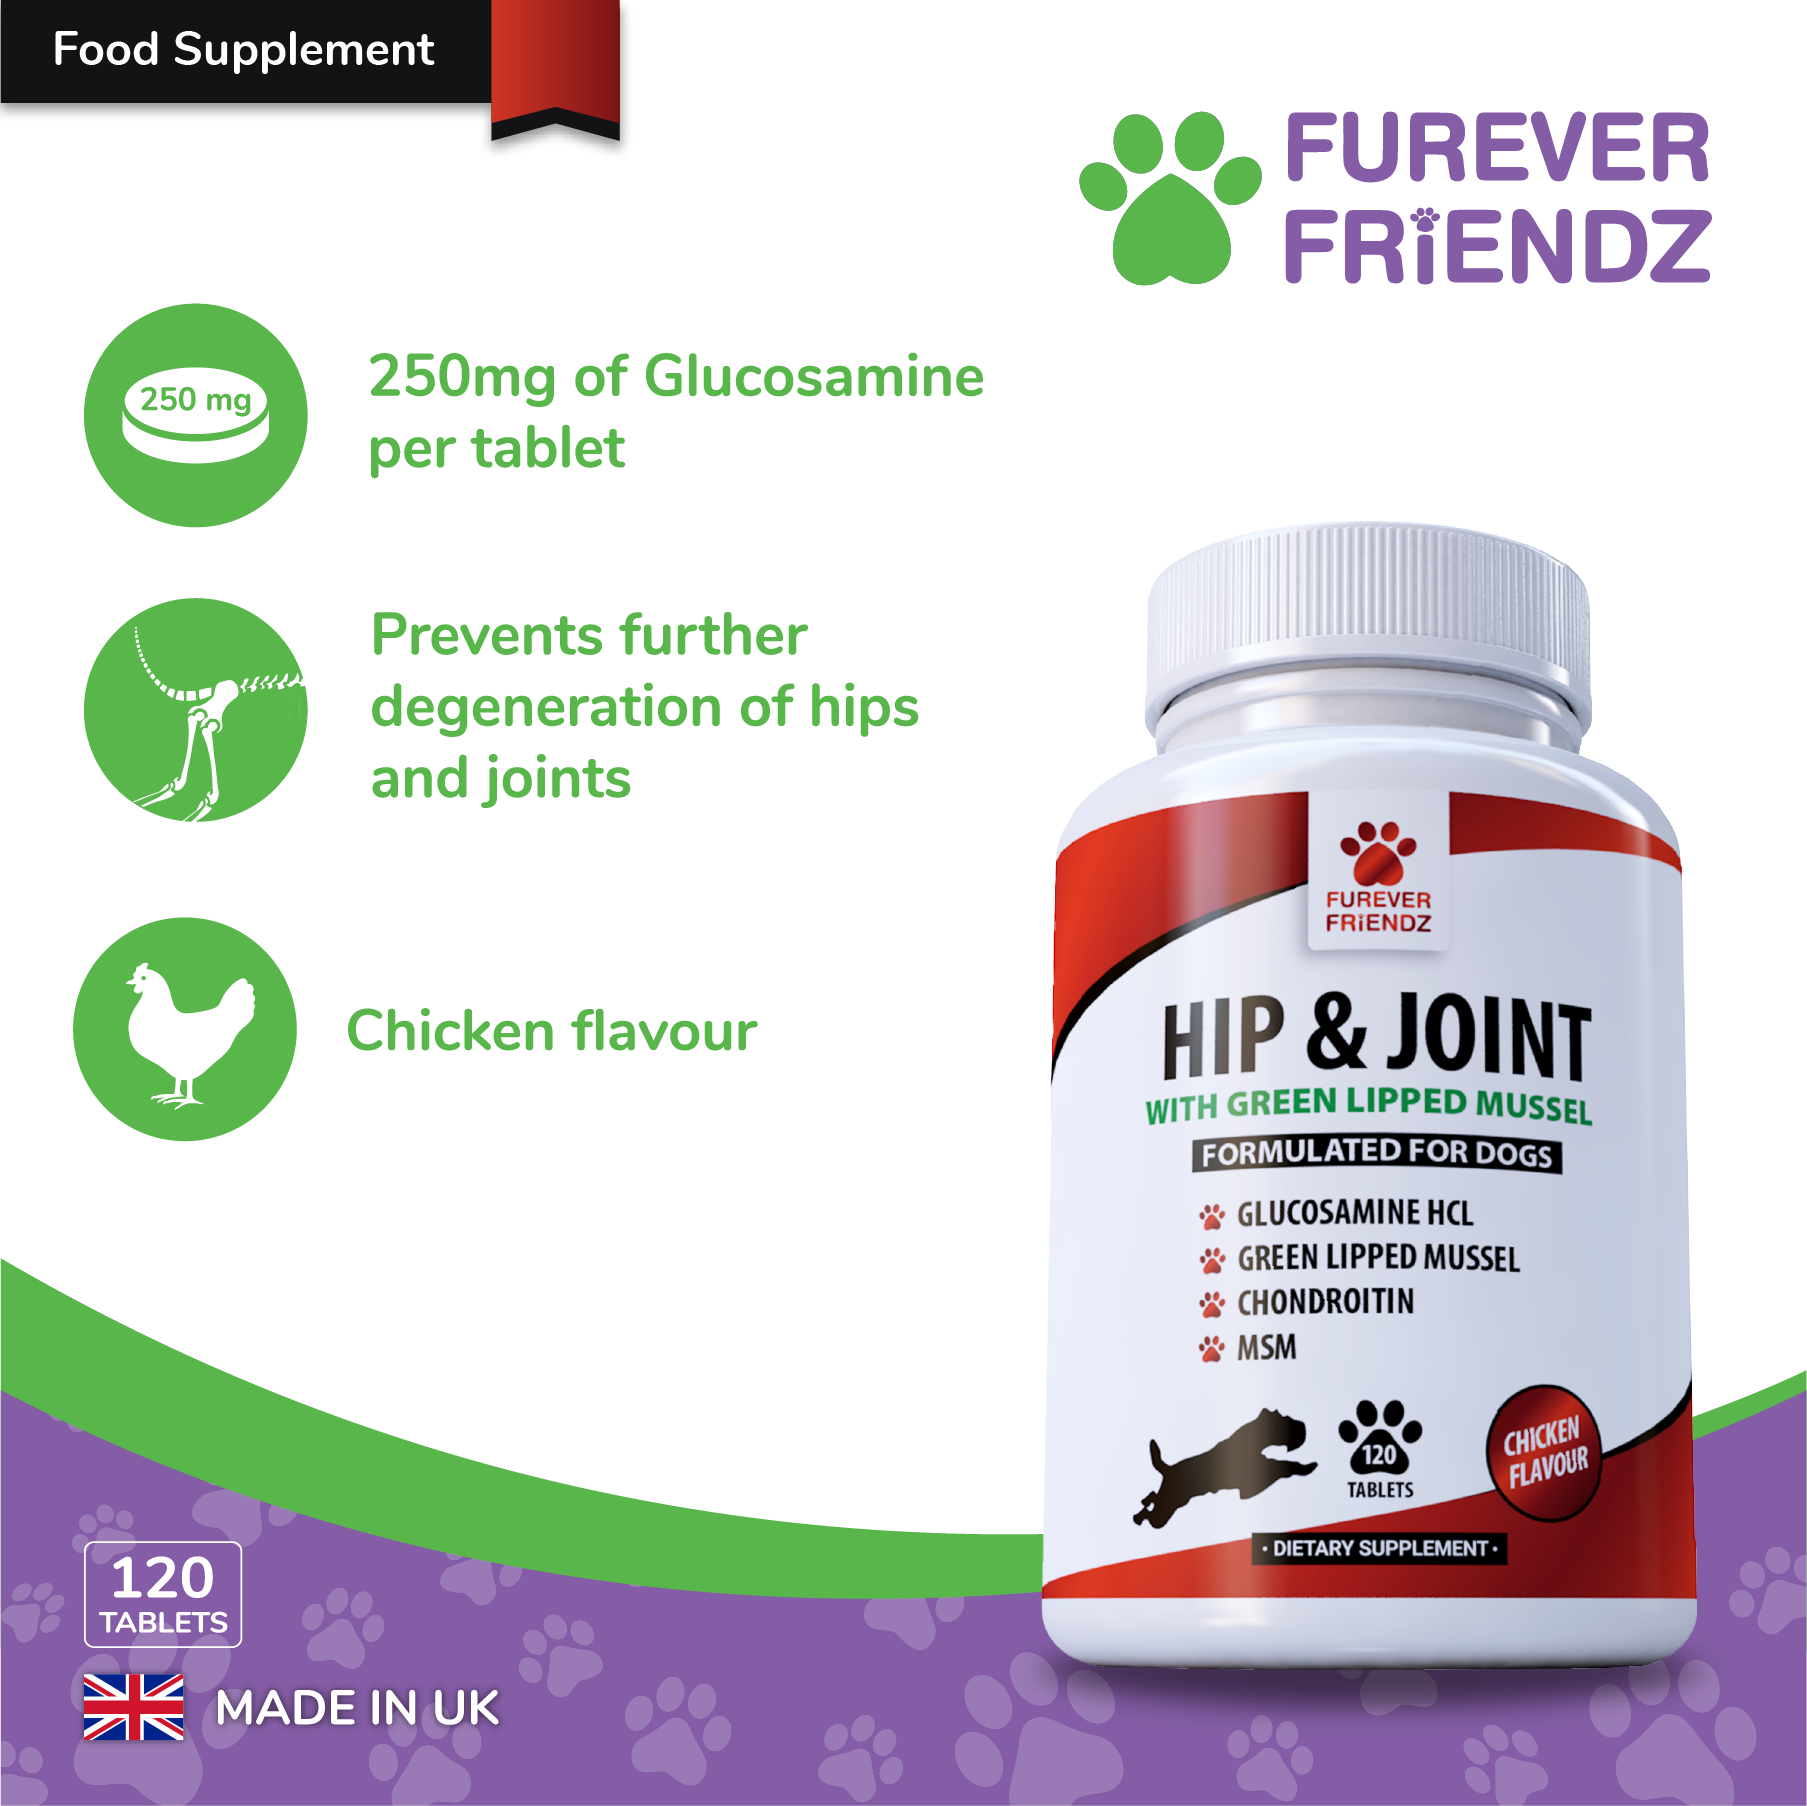 Glucosamine for Dogs with Green Lipped Mussel, Chondroitin, MSM & Vitamin C (Chicken Flavour Tablets)